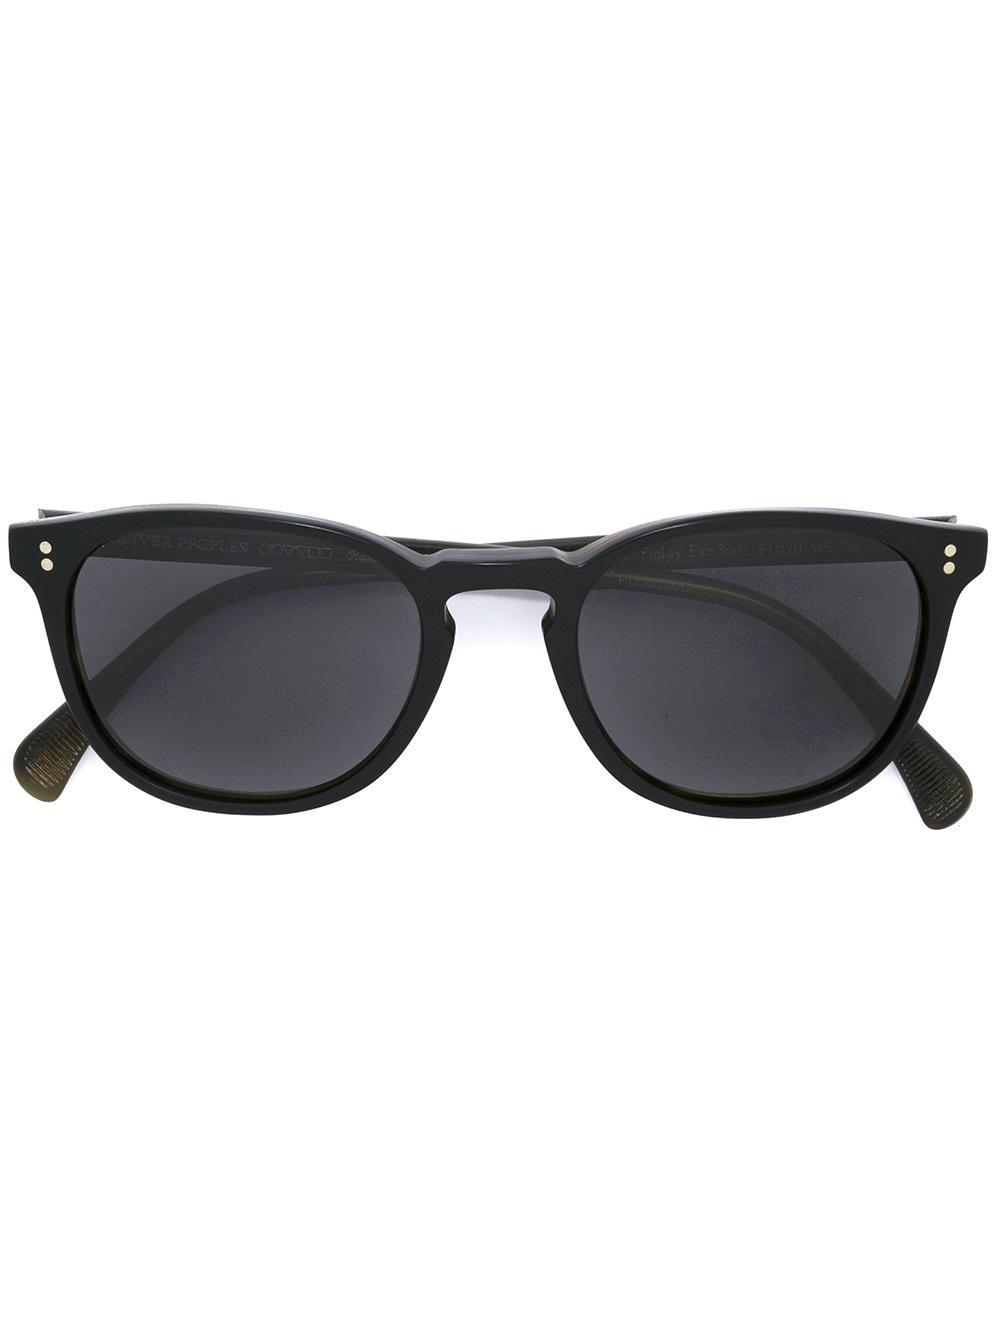 Oliver peoples Finley Esq. Sunglasses in Black | Lyst